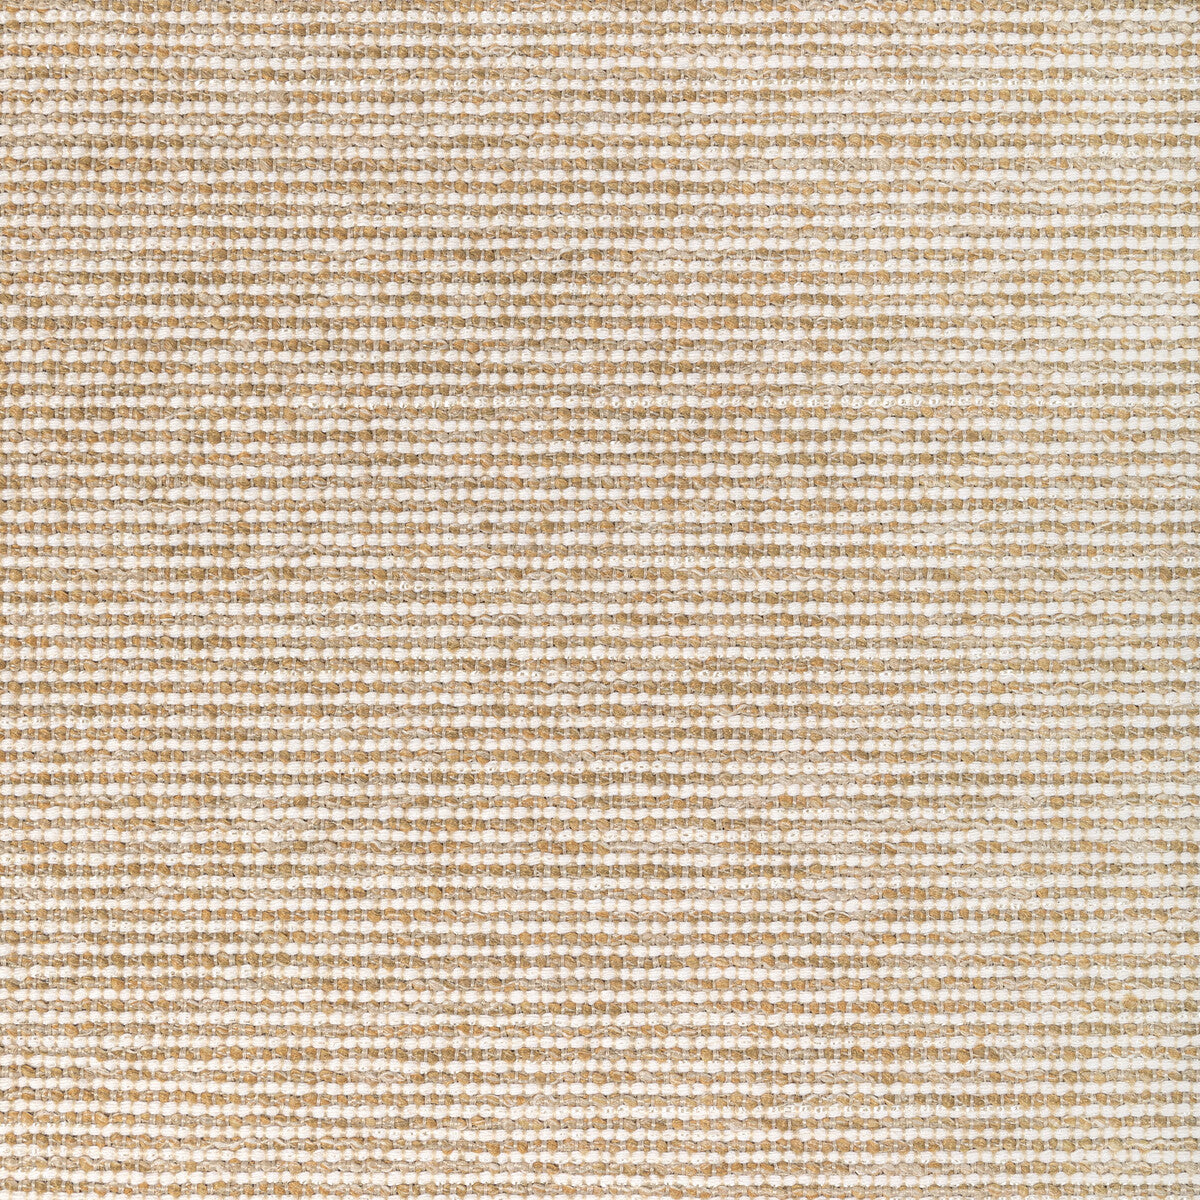 Uplift fabric in dune color - pattern 36565.116.0 - by Kravet Contract in the Seaqual collection